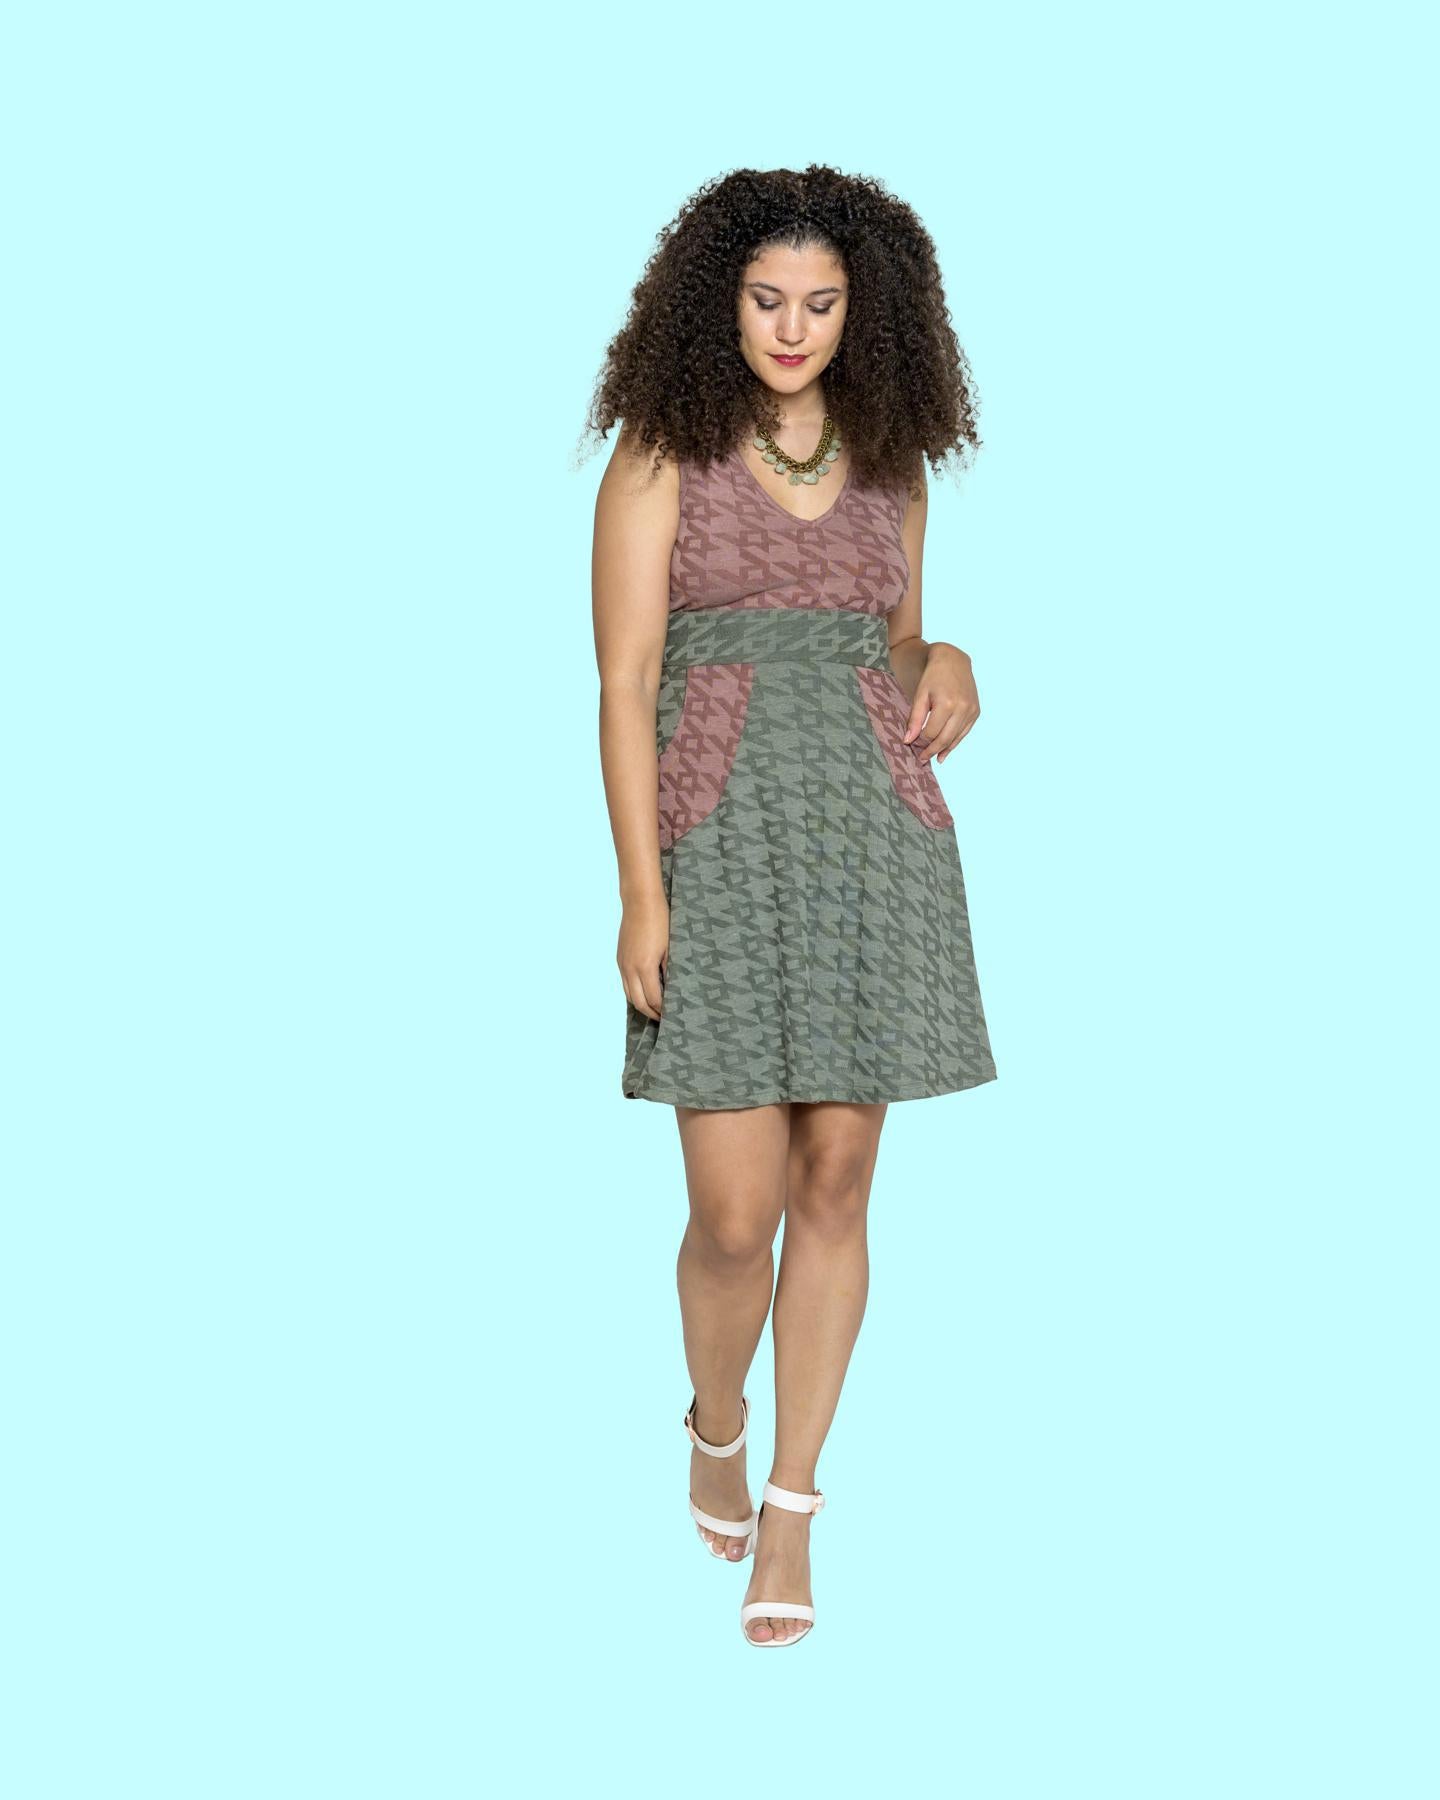 Squasht Aileen Dress in Sage and Blush Houndstooth - SALE